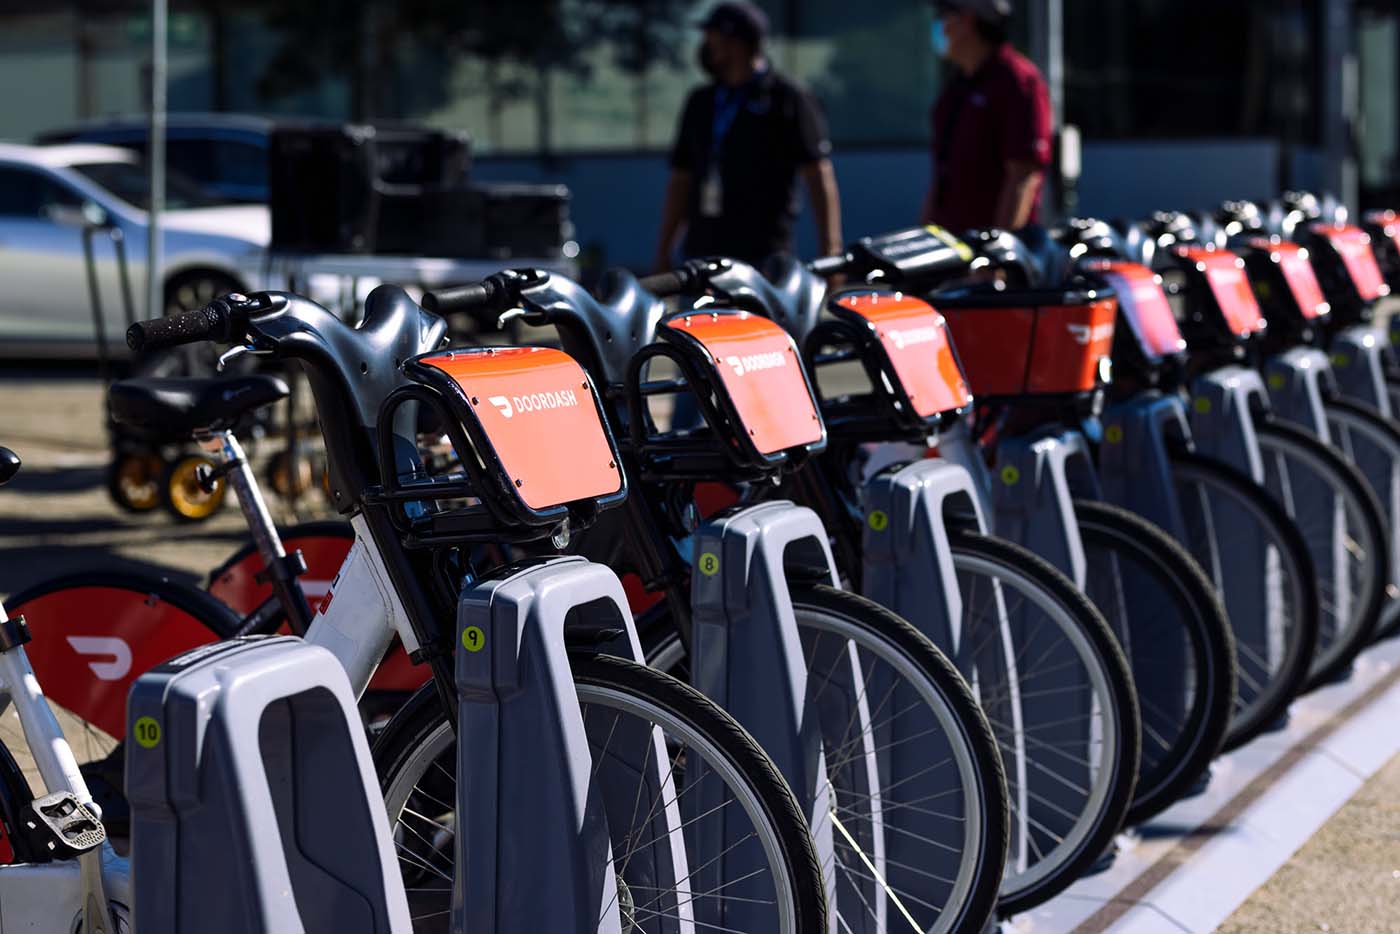 L.A. Metro Temporarily Suspends North Hollywood Bike Share System